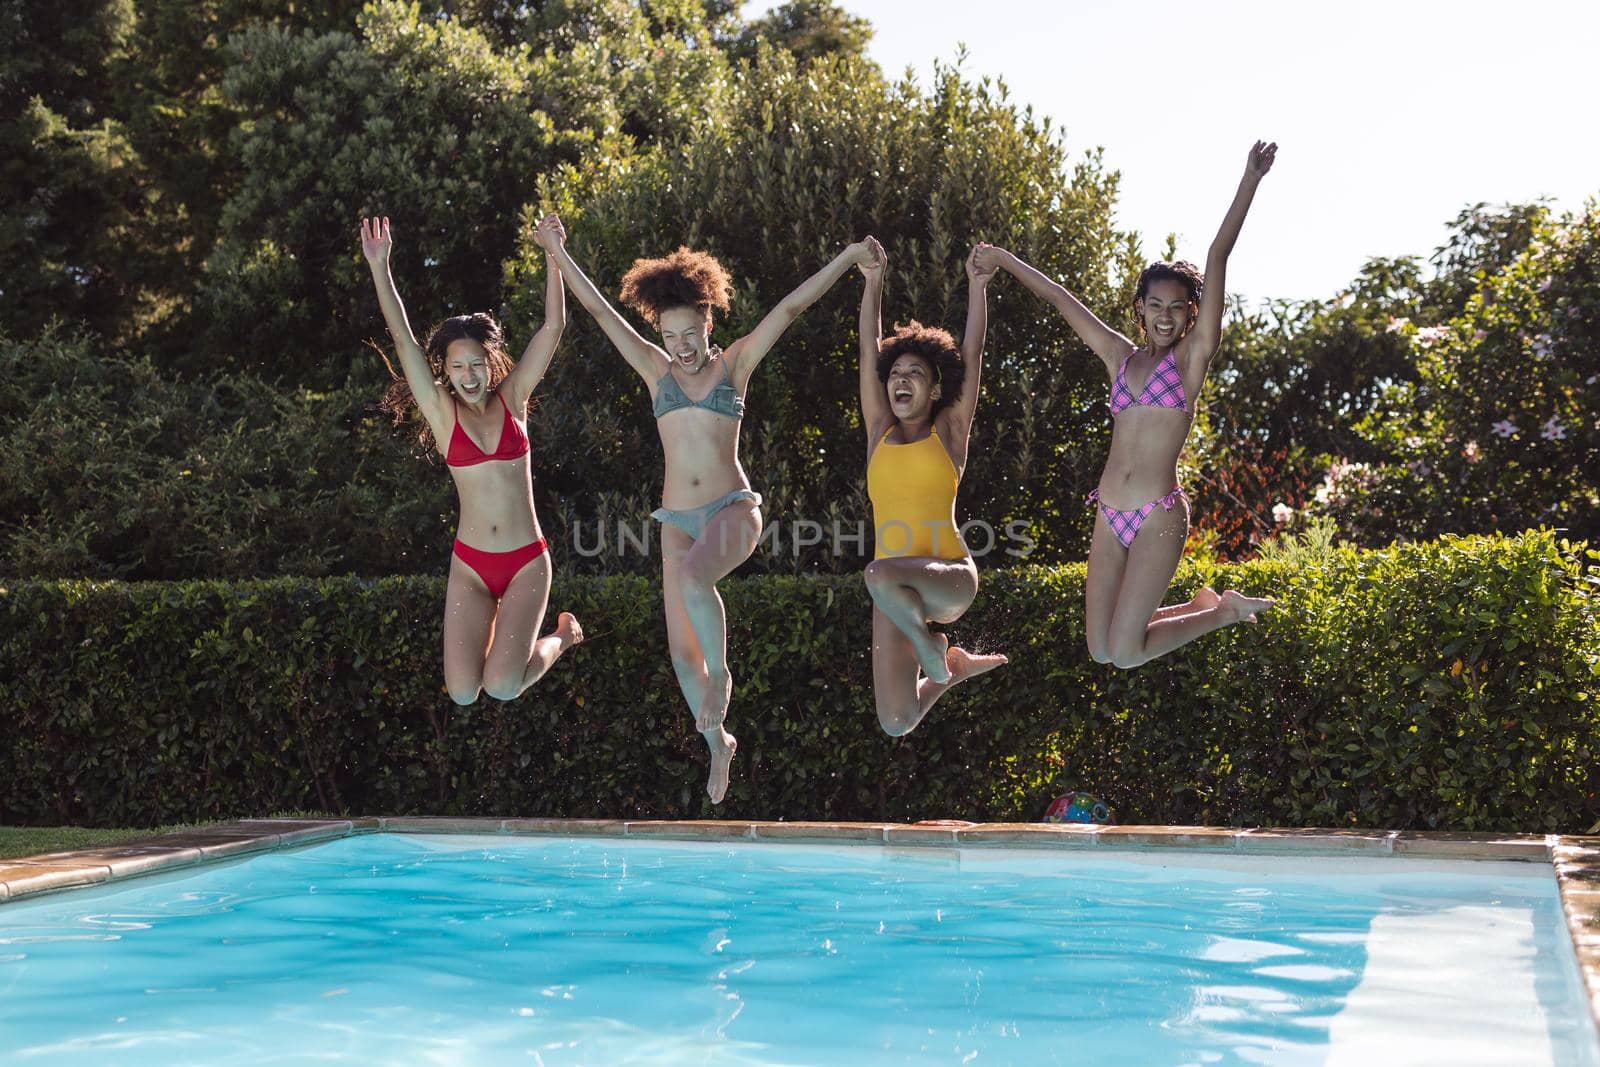 Diverse group of female friends having fun and jumping into water at a pool party. hanging out and relaxing outdoors in summer.